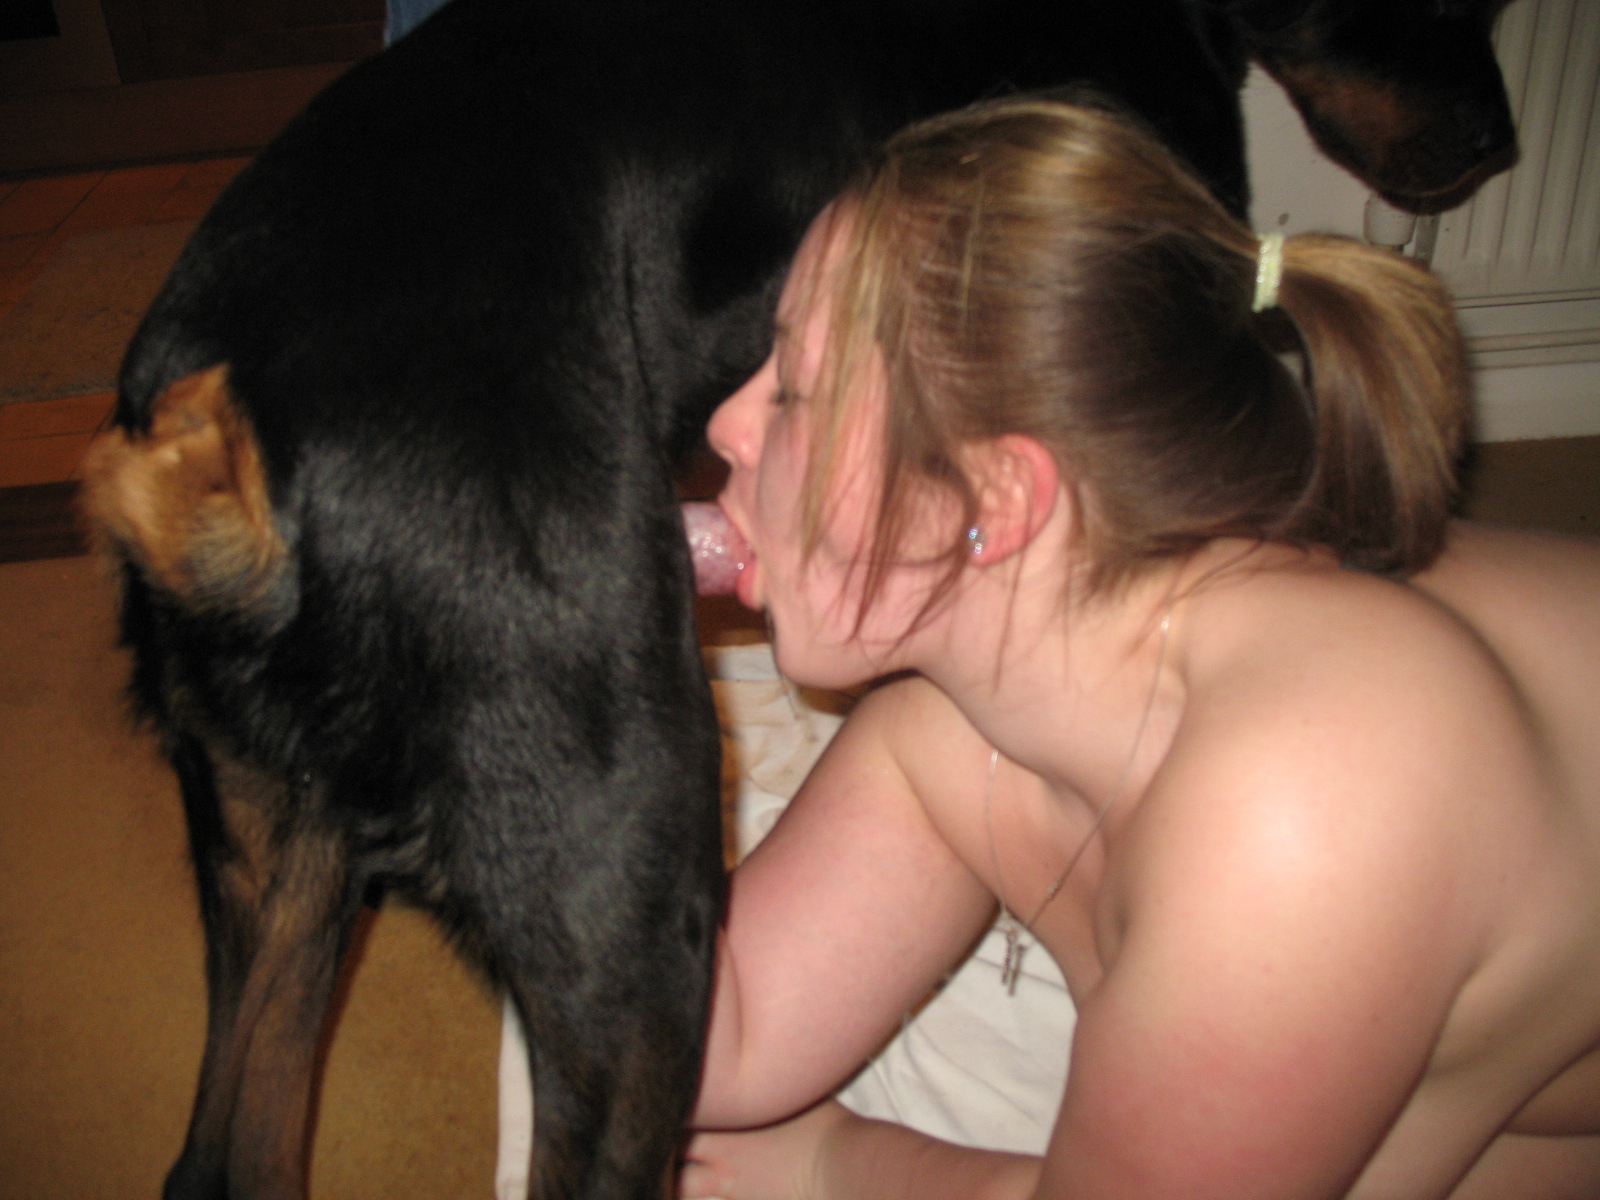 Sexing with dog